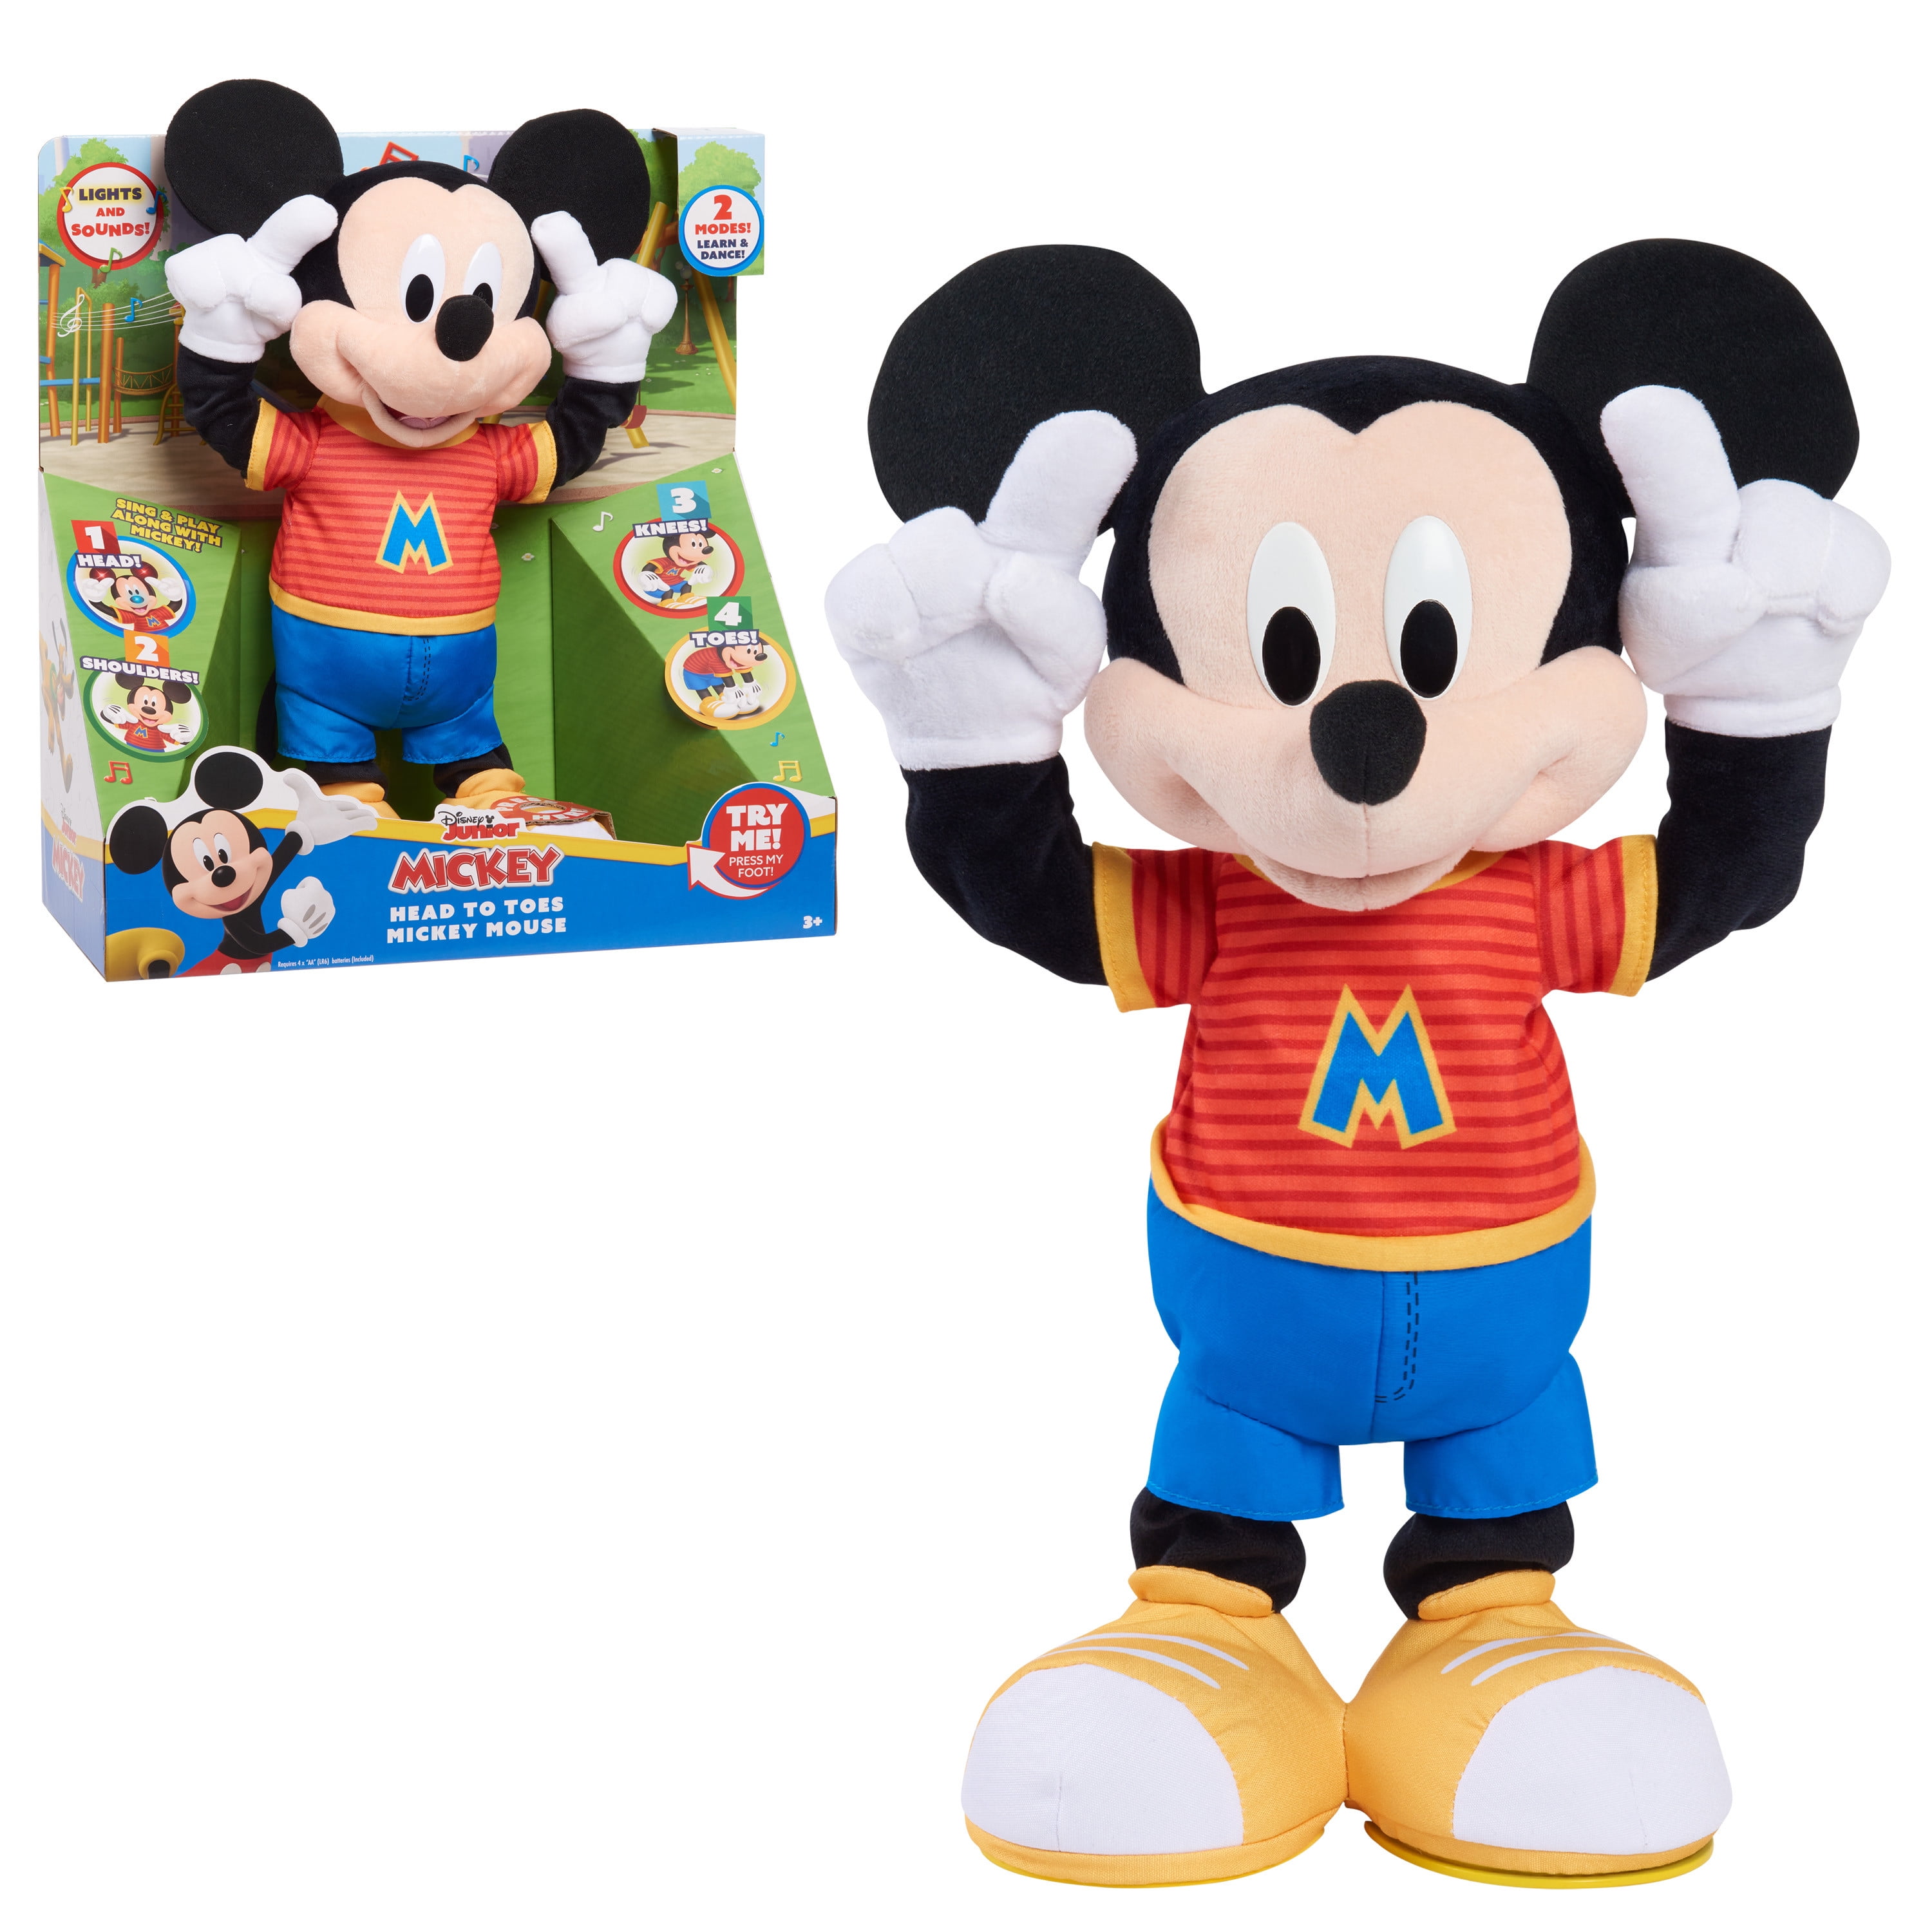 Disney Junior Mickey Mouse Head to Toes Mickey Mouse Feature Plush Stuffed Animal, Motion, Sounds, and Phrases, Officially Licensed Kids Toys for Ages 3 Up, Gifts and Presents